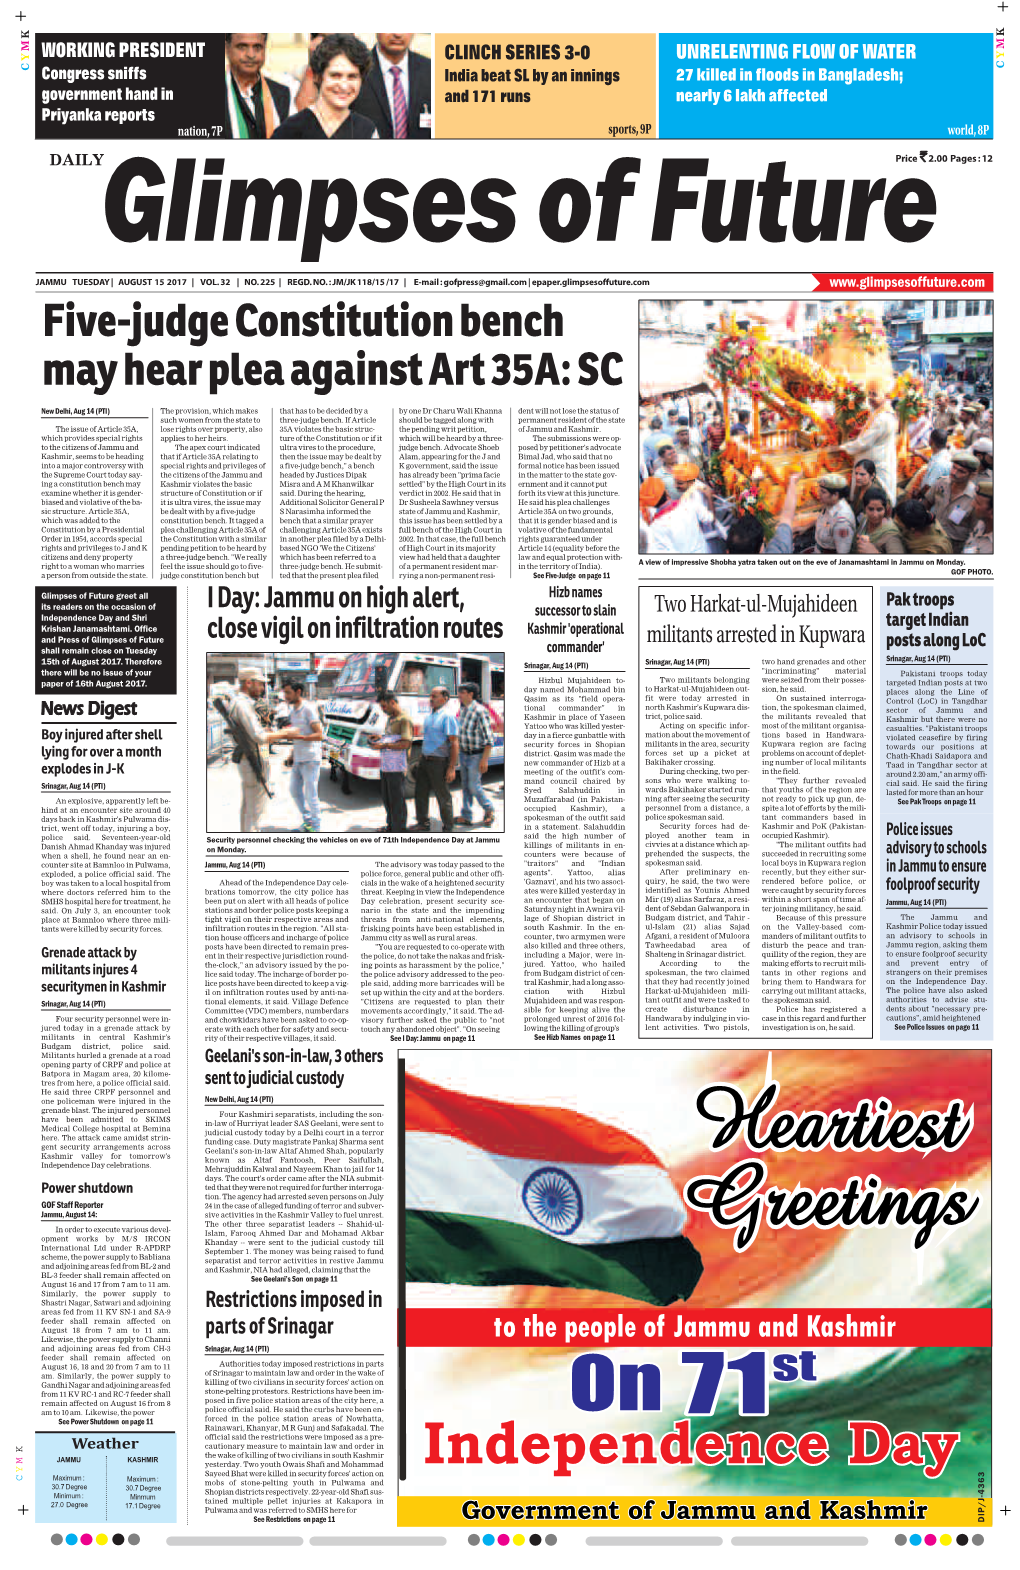 Five-Judge Constitution Bench May Hear Plea Against Art 35A: SC